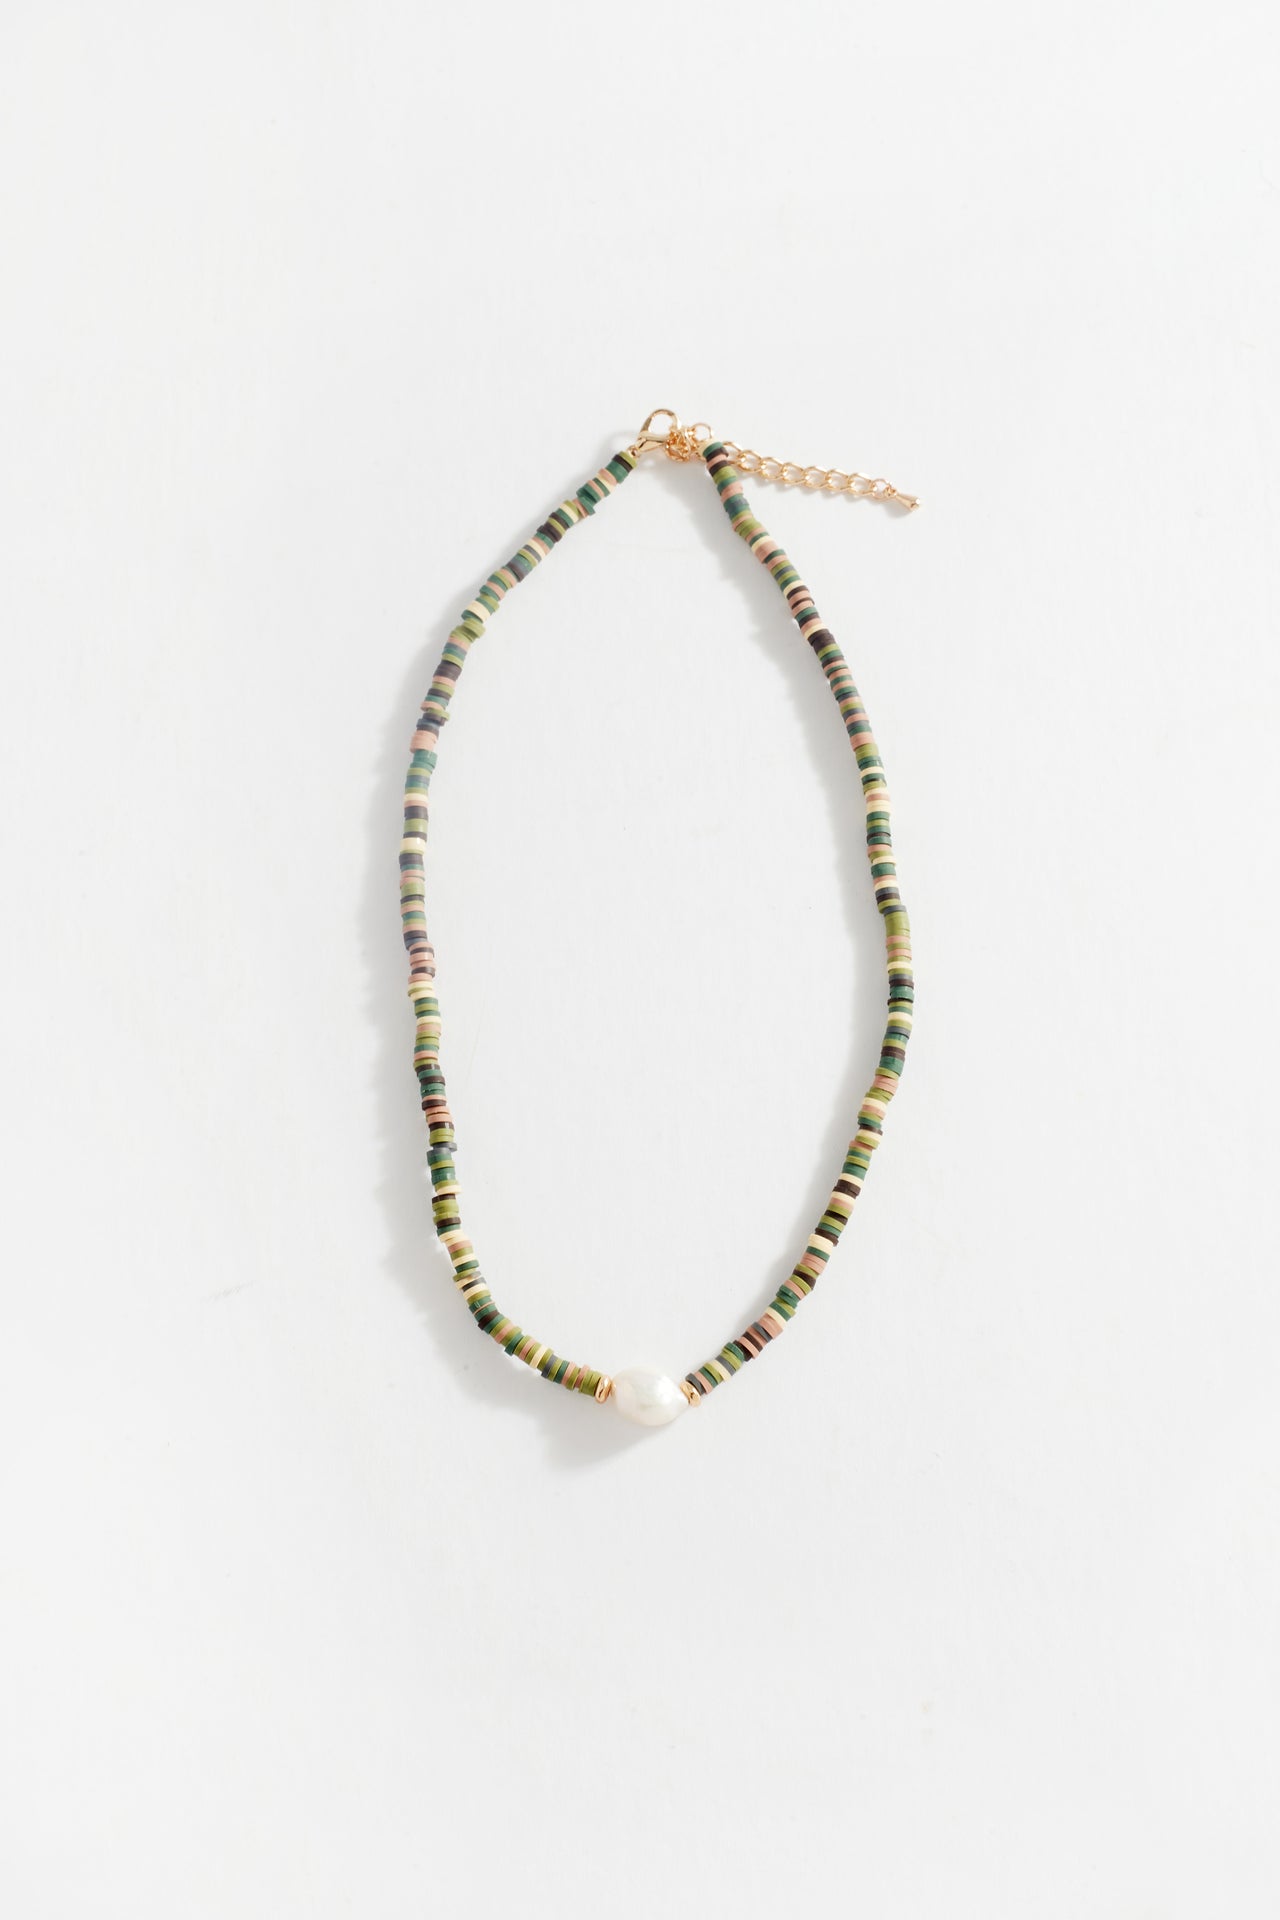 Festival Necklace in Olive